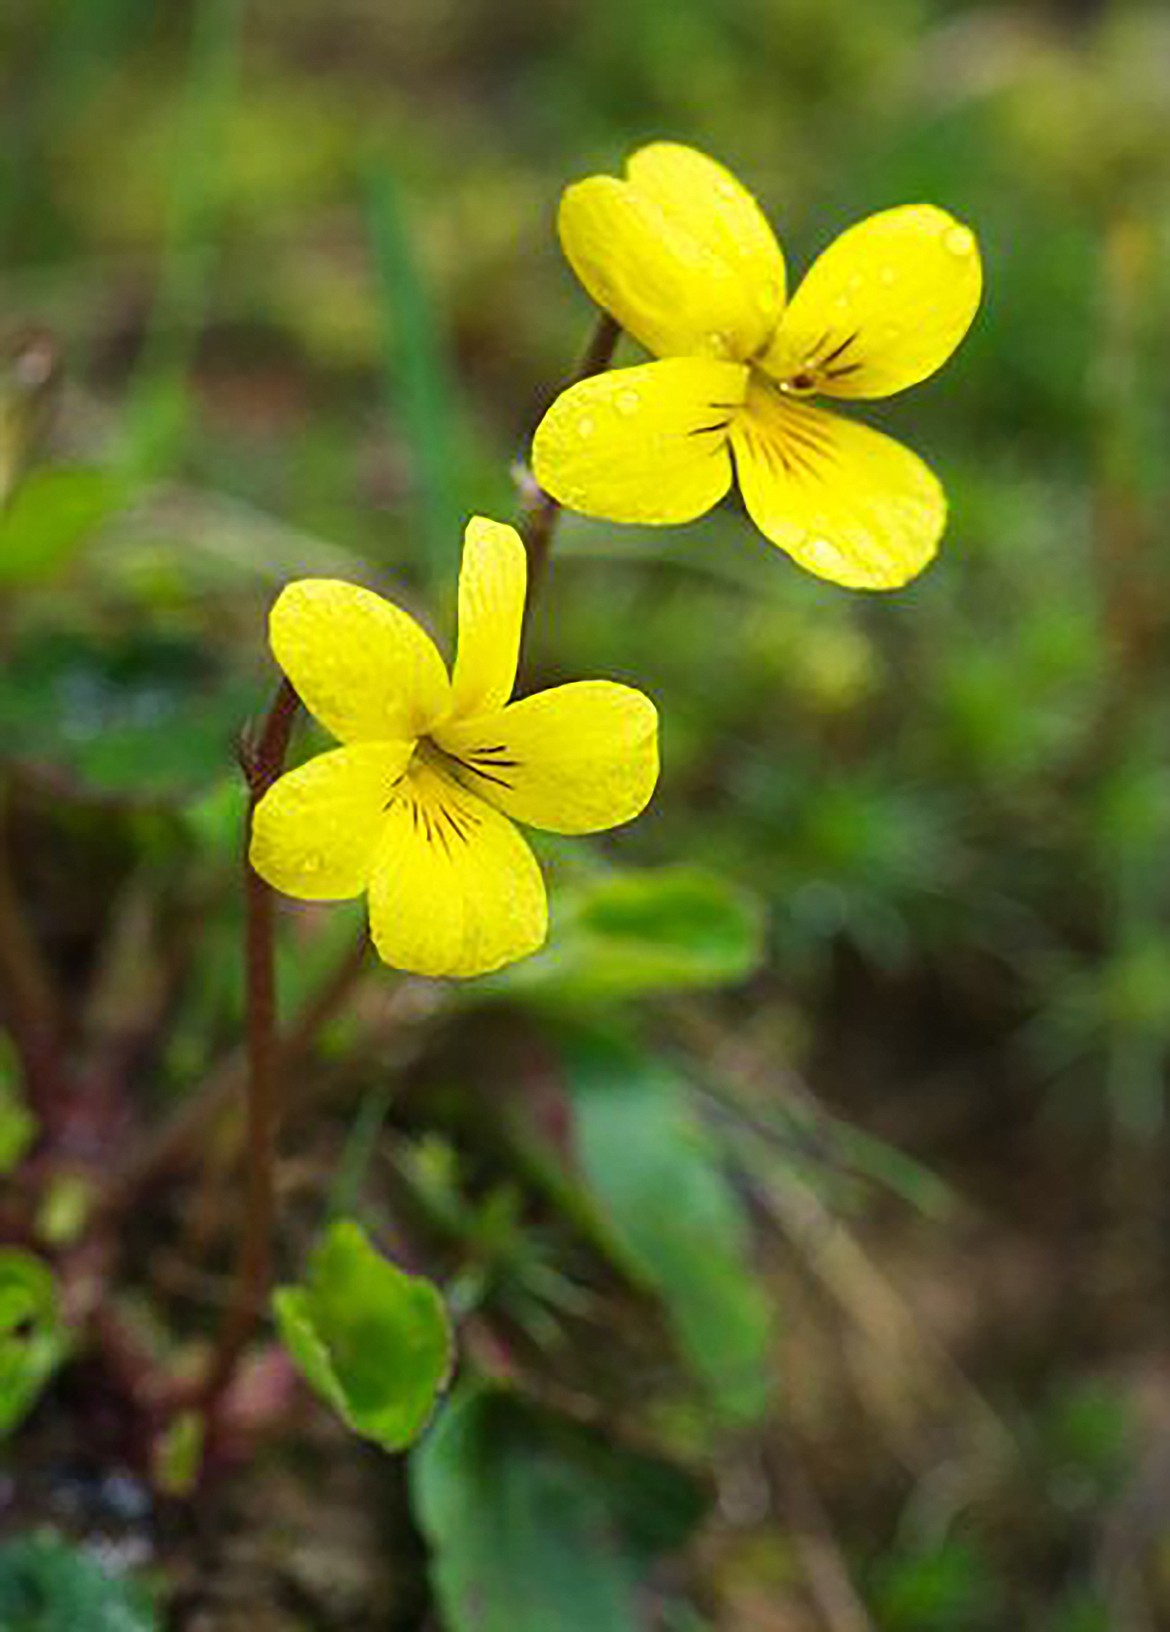 The five-petaled bright yellow flowers of Round-leaf violets appear in early spring with brownish-purple veins in the lower three petals.